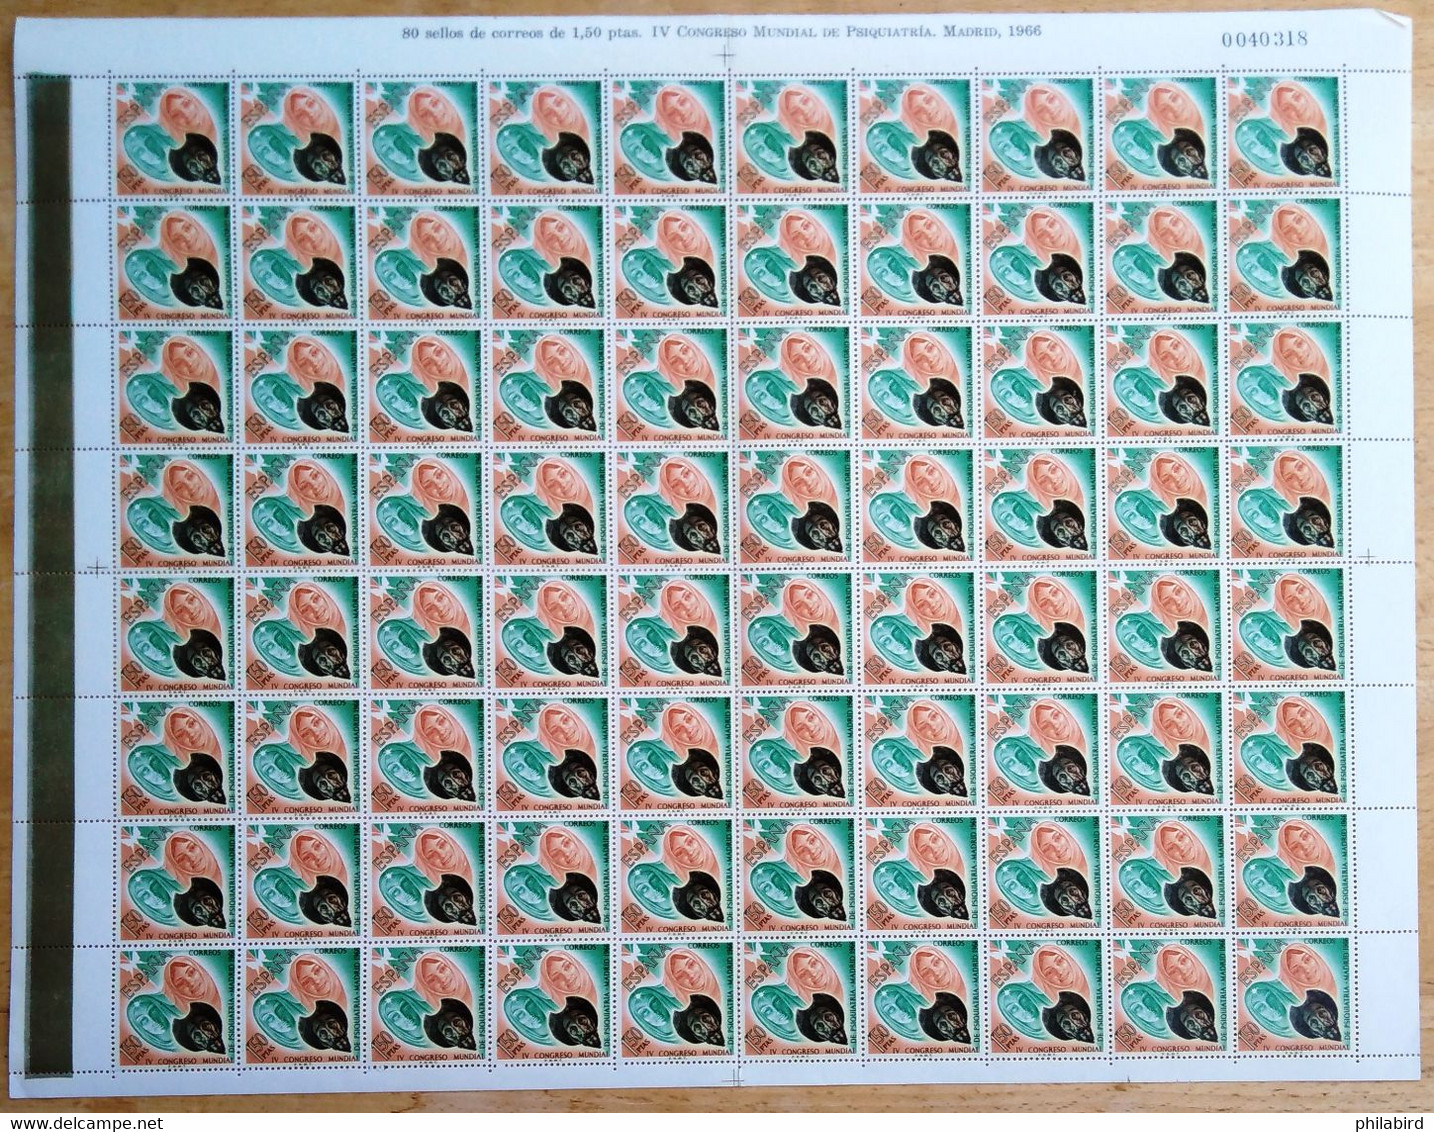 ESPAGNE                      N° 1401       Feuille Complète 80 Timbres                      NEUF** - Full Sheets